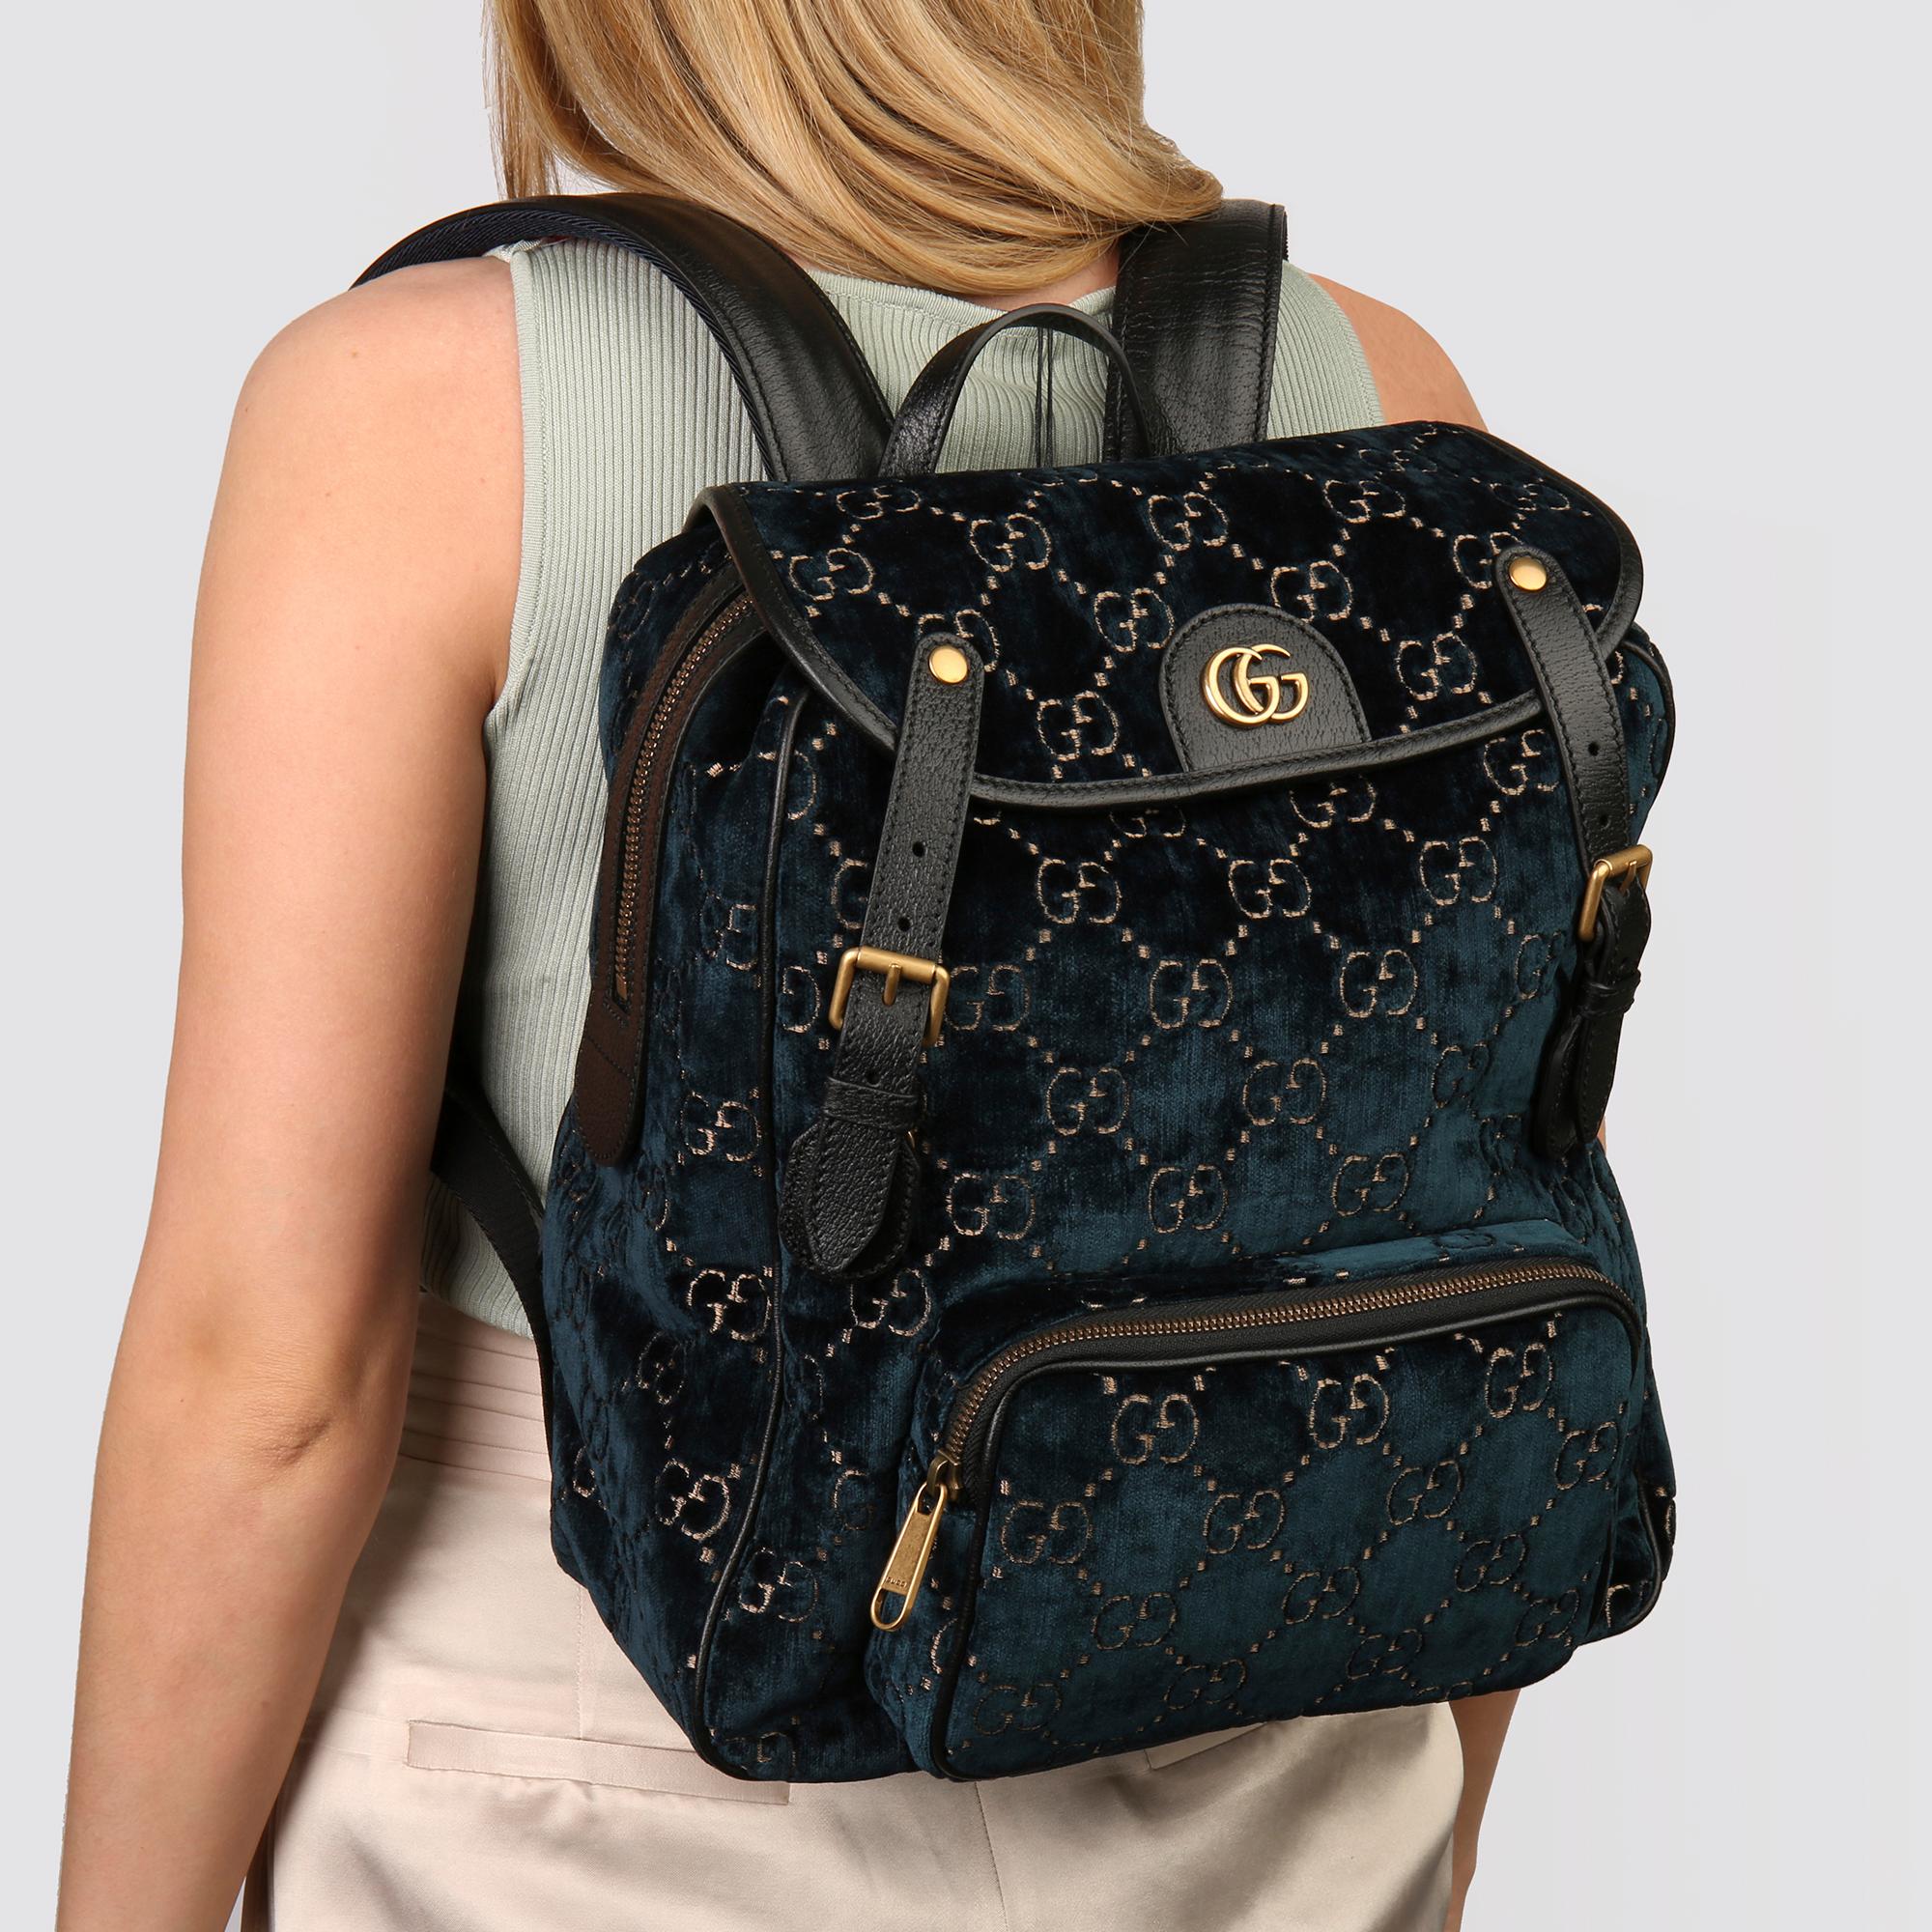 GUCCI
Dark Blue GG Velvet & Black Pigskin Small Marmont Backpack

Xupes Reference: HB3641
Serial Number: 574942 213317
Age (Circa): 2020
Accompanied By: Gucci Dust Bag, Care Booklet
Authenticity Details: Serial Sticker (Made in Italy)
Gender: